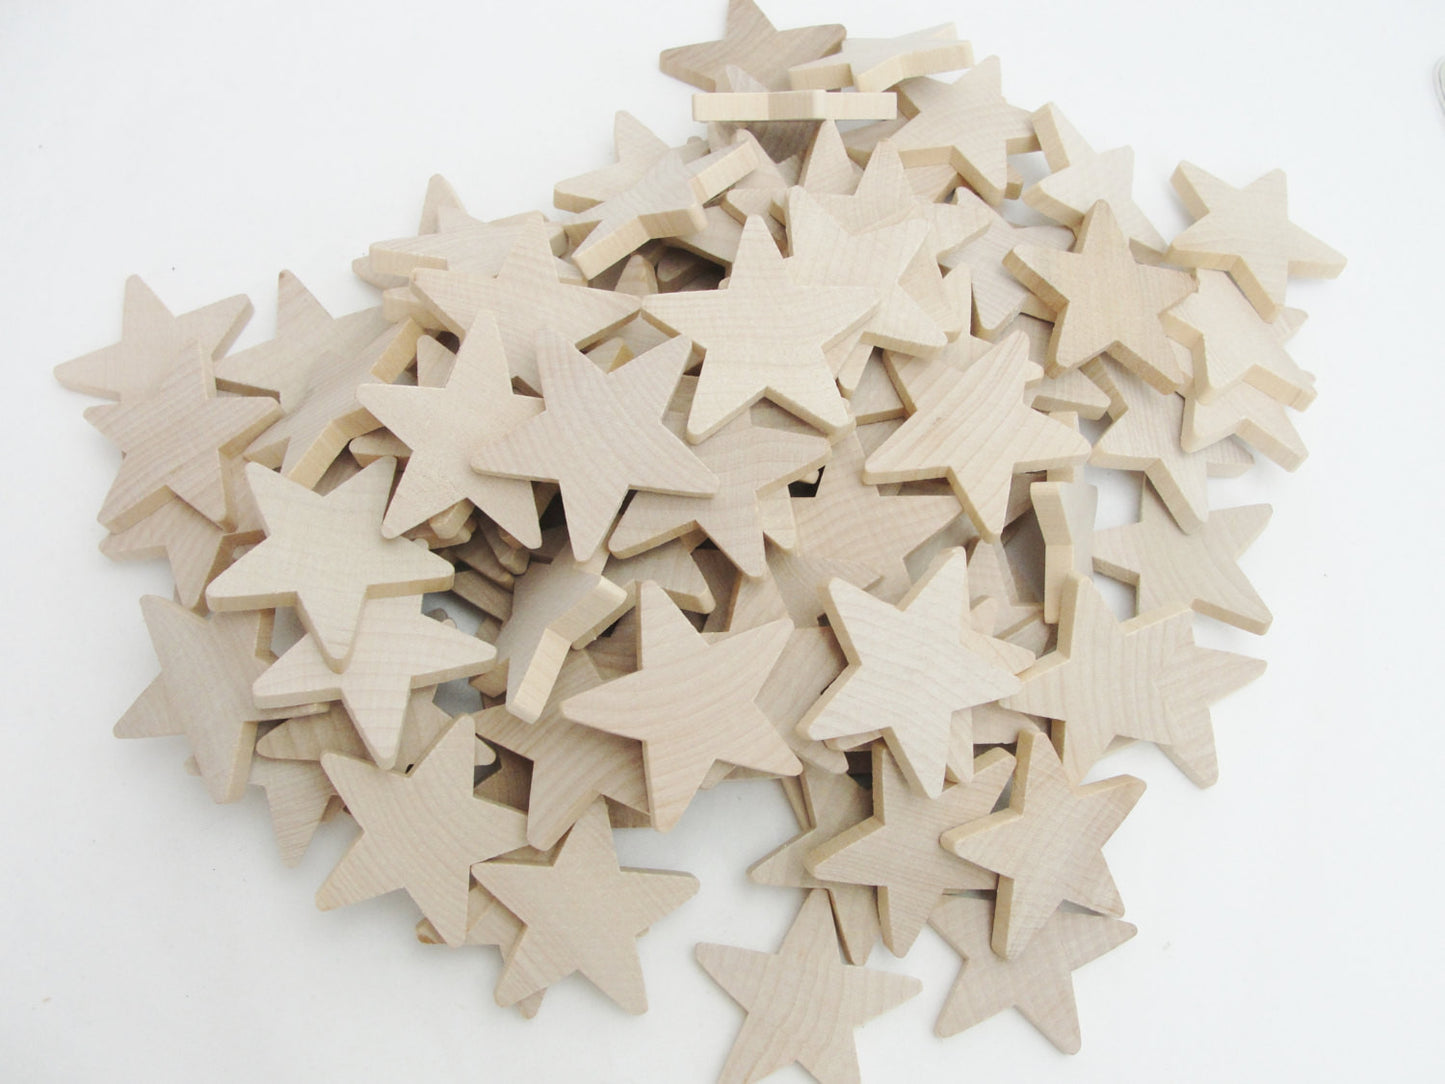 Traditional 2 inch (2") x 1/4" wooden stars - Wood parts - Craft Supply House